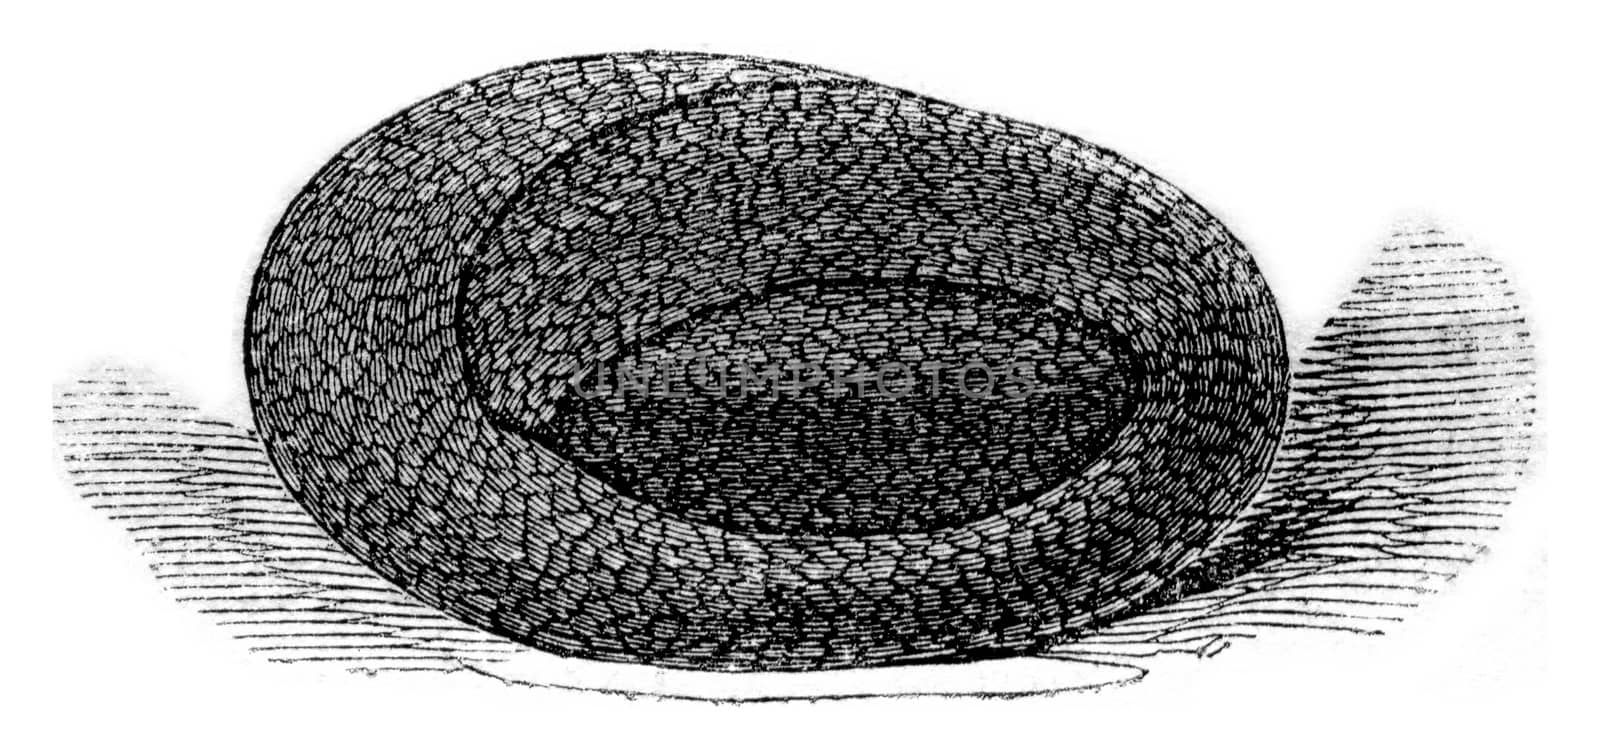 Small viper coiled on itself egg shaped such that it is in the body of the female, vintage engraved illustration. Magasin Pittoresque 1844.
